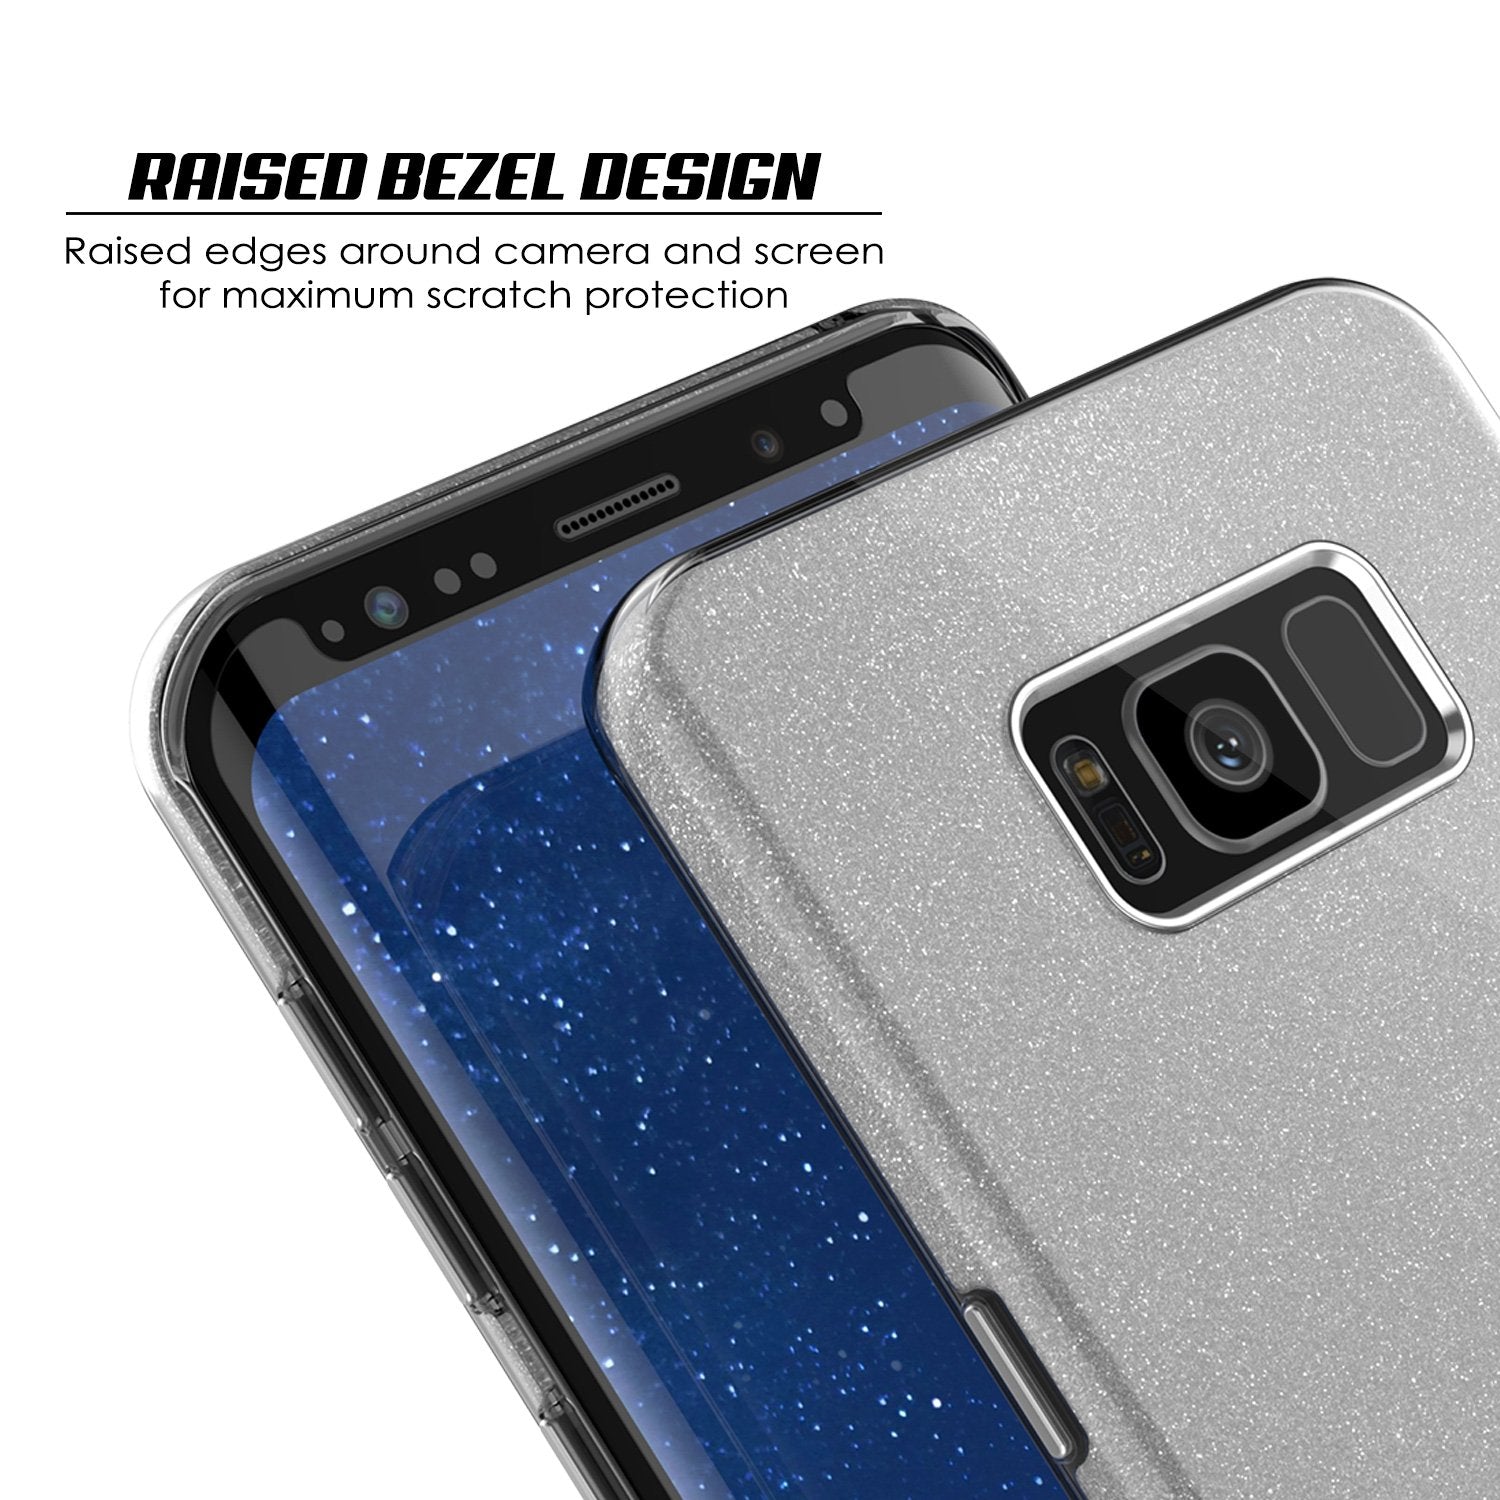 Galaxy S8 Plus Case, Punkcase Galactic 2.0 Series Ultra Slim Protective Armor TPU Cover [Silver]